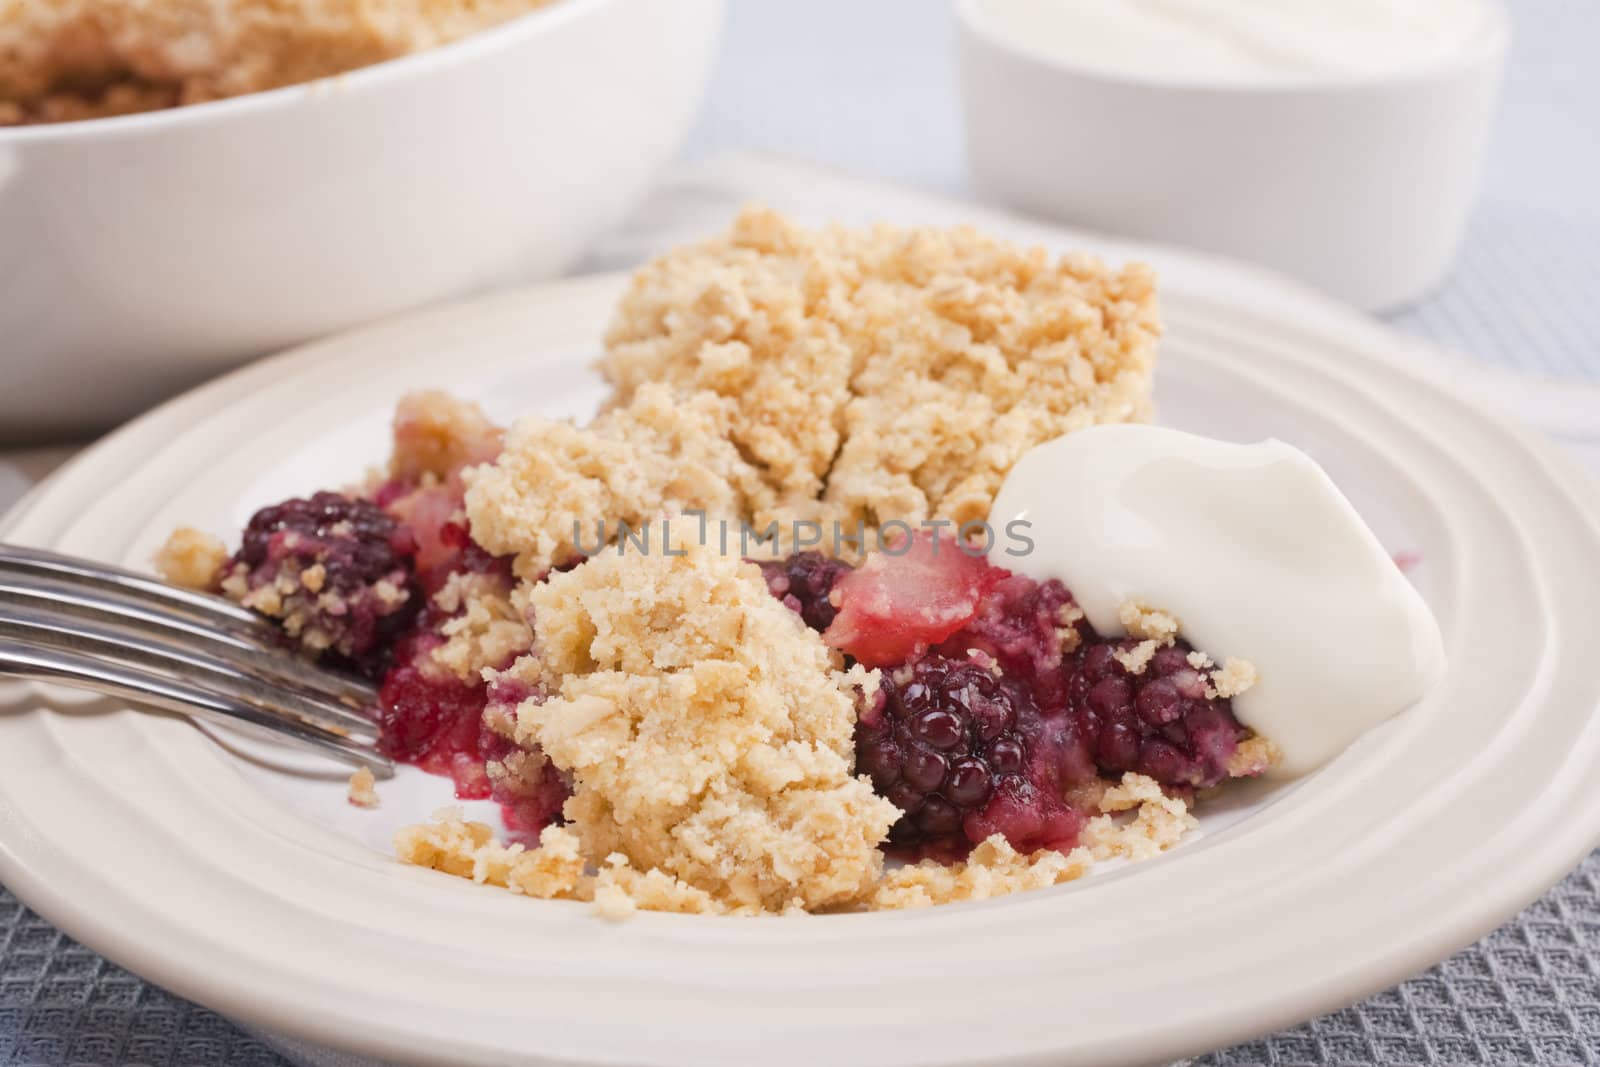 Home baked blackberry and apple crumble with a dollop of Greek yoghurt. Making the most of juicy autumn fruits.